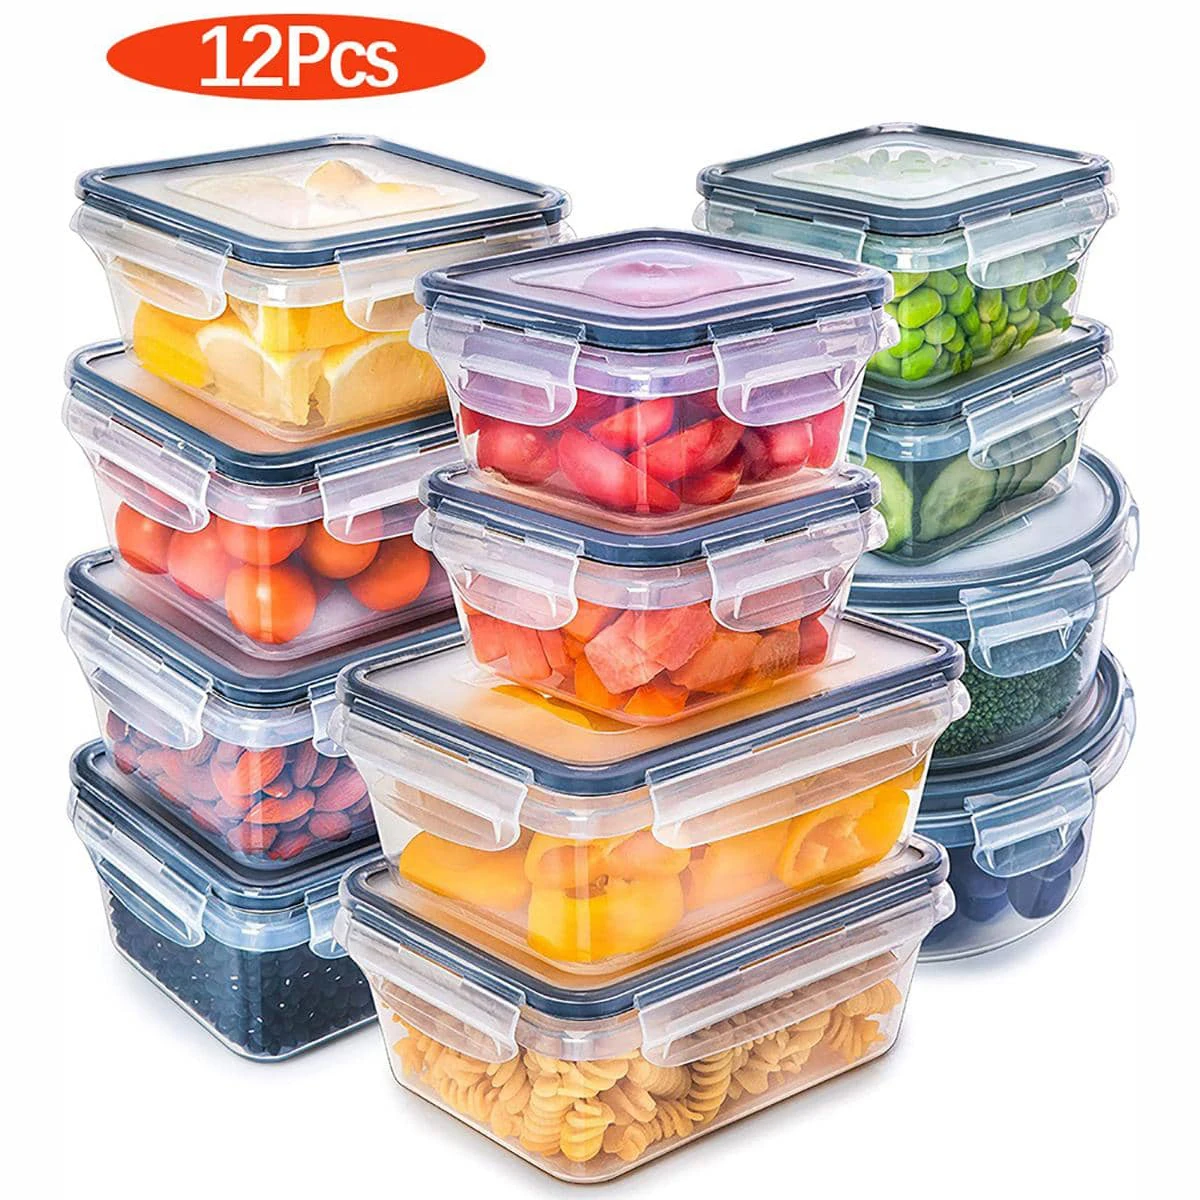 https://ae01.alicdn.com/kf/Se52fc6fcf5d2468283df99b311e46b89K/12-Piece-Food-Storage-Containers-Set-with-Easy-Snap-Lids-12-Lids-12-Containers-Airtight-Plastic.jpg